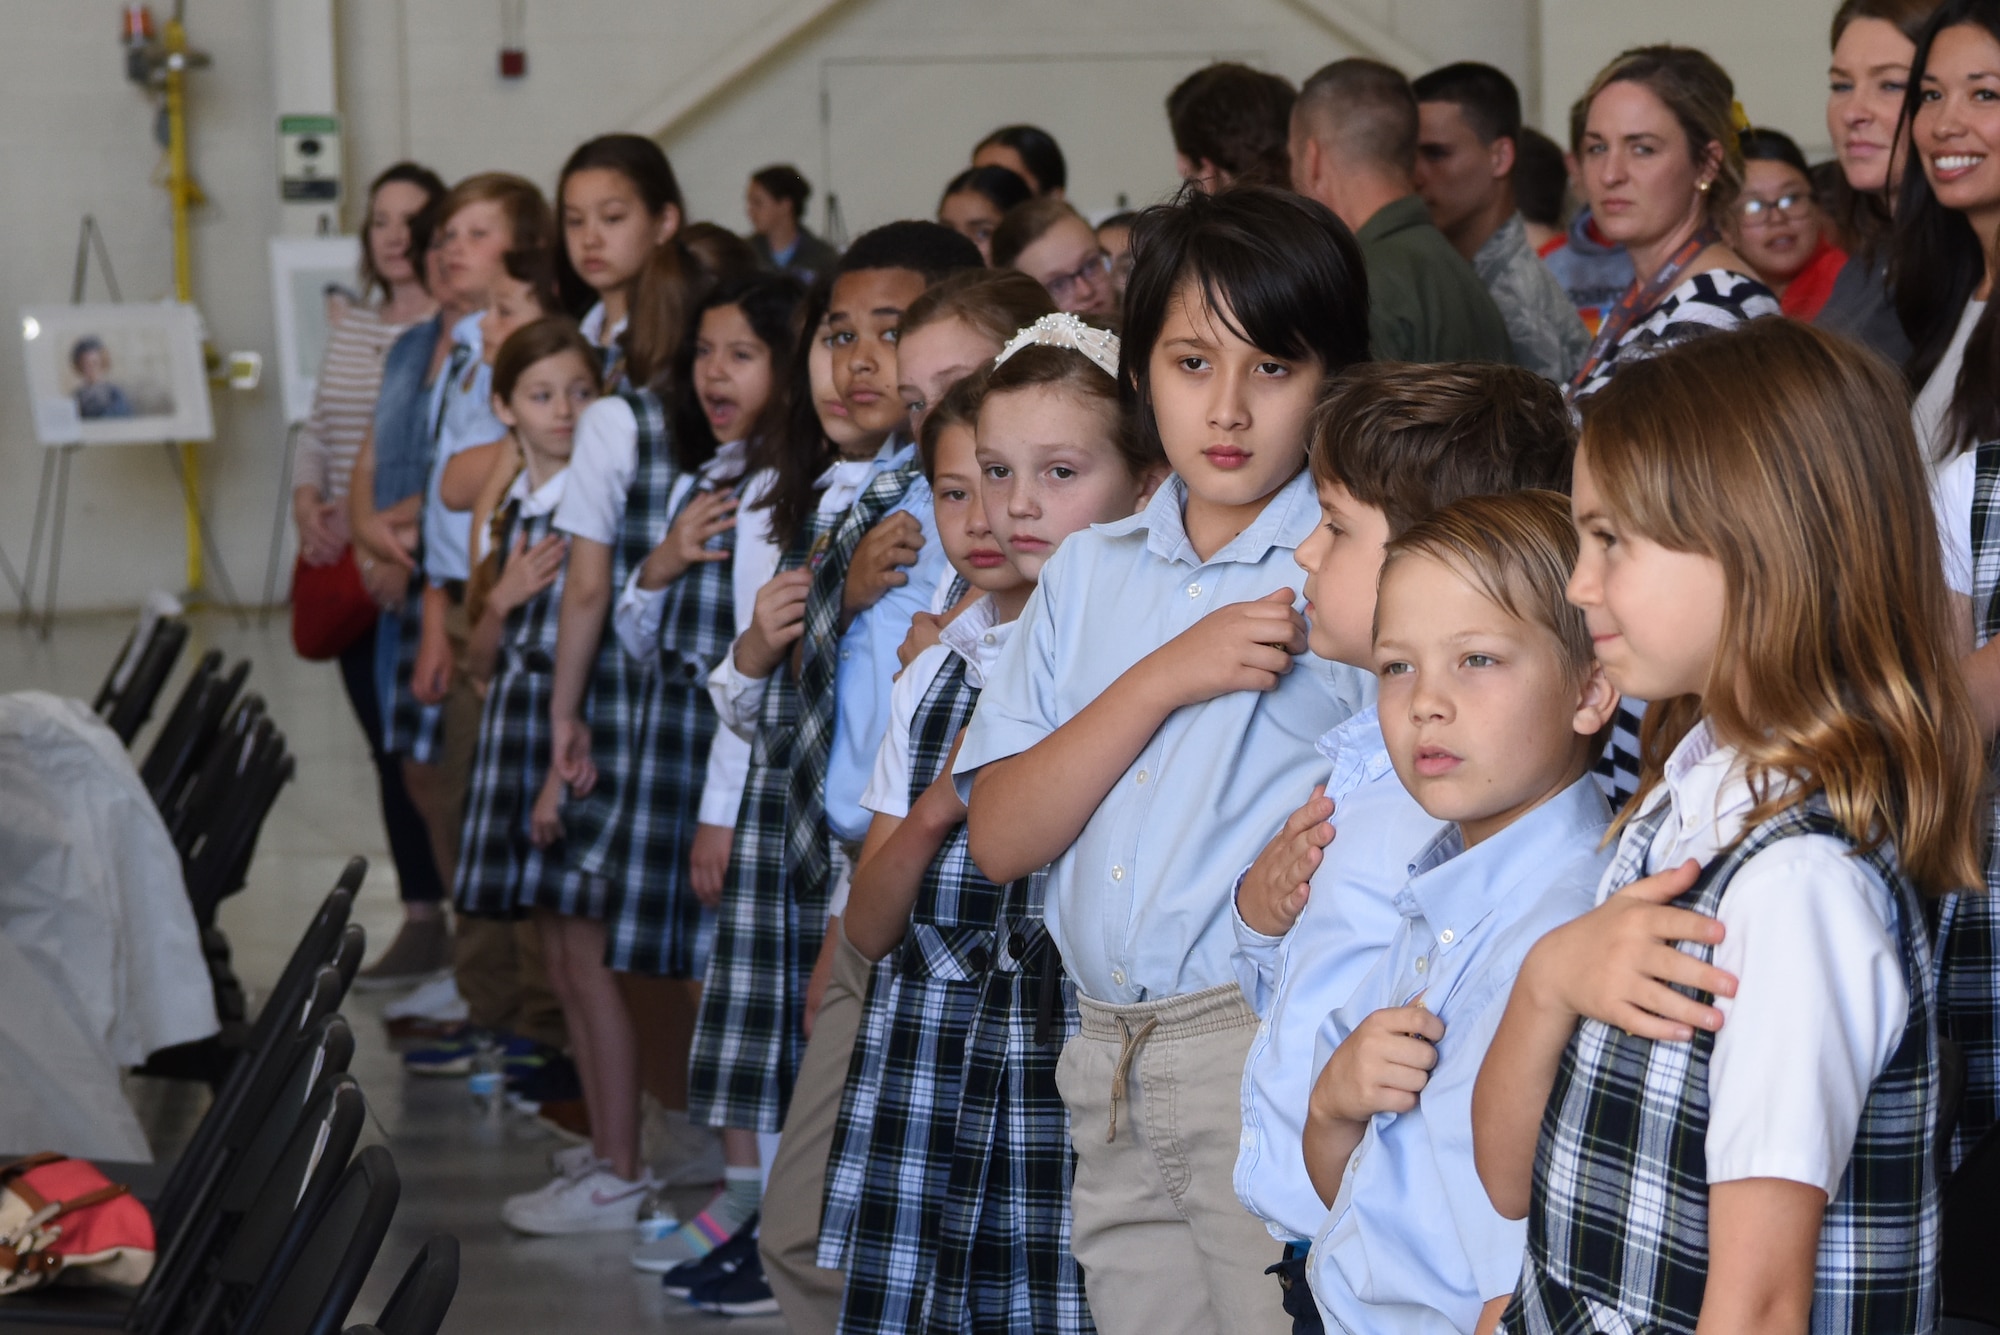 Students from St. John’s Episcopal School put their hands over their hearts during the national anthem at Dyess Air Force Base, Texas, April 29, 2022. The event marks the 80th anniversary for Women Airforce Service Pilots, or WASP, the 80th anniversary of the 317th Airlift Wing and the 80th anniversary of the 8th Air Force. (U.S. Air Force Photo by Senior Airman Sophia Robello)